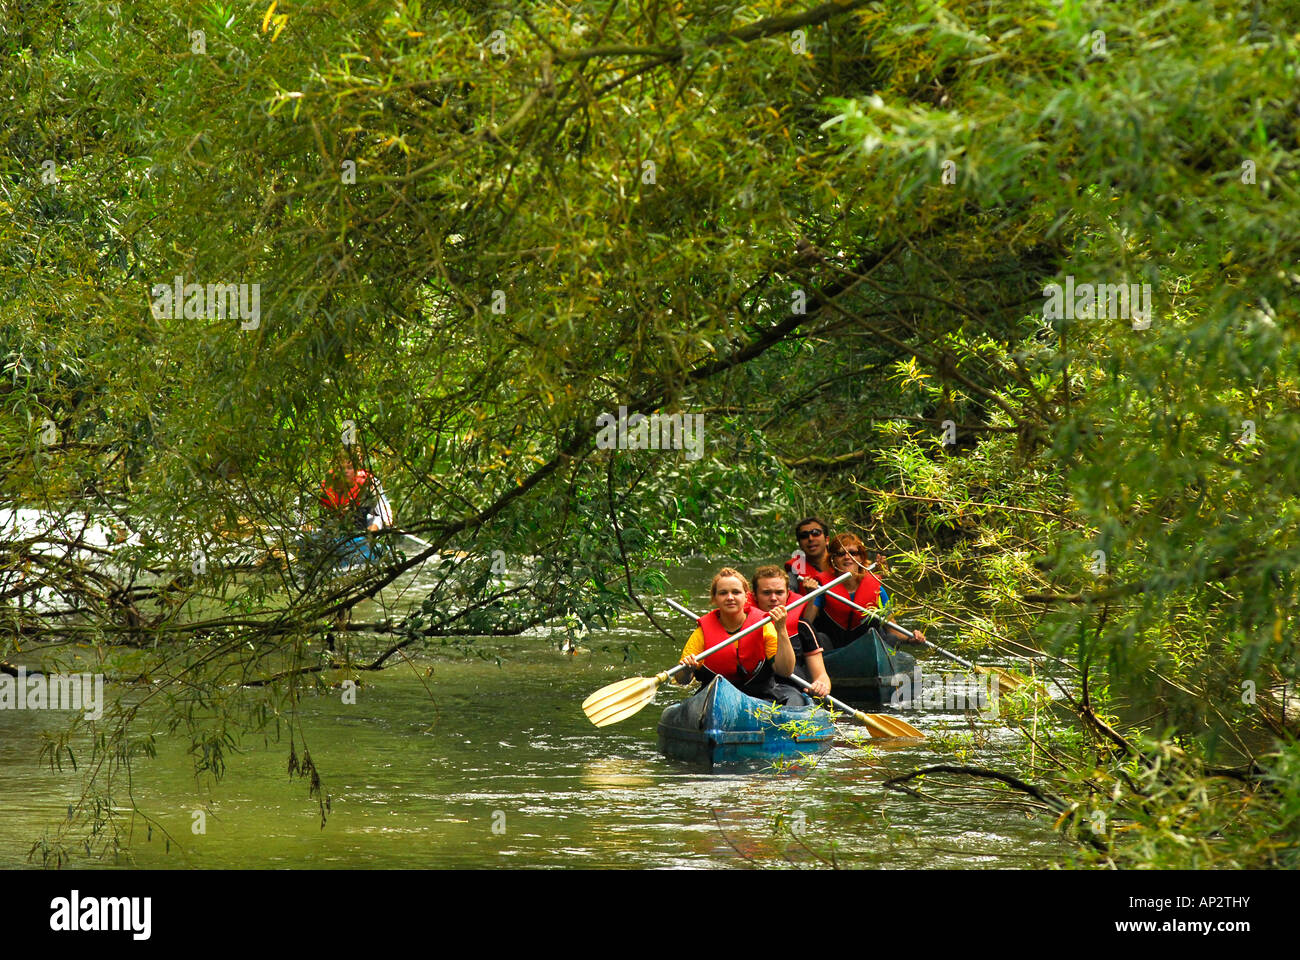 People in a canoe on the Werra river near Breitungen, Thuringia, Germany Stock Photo